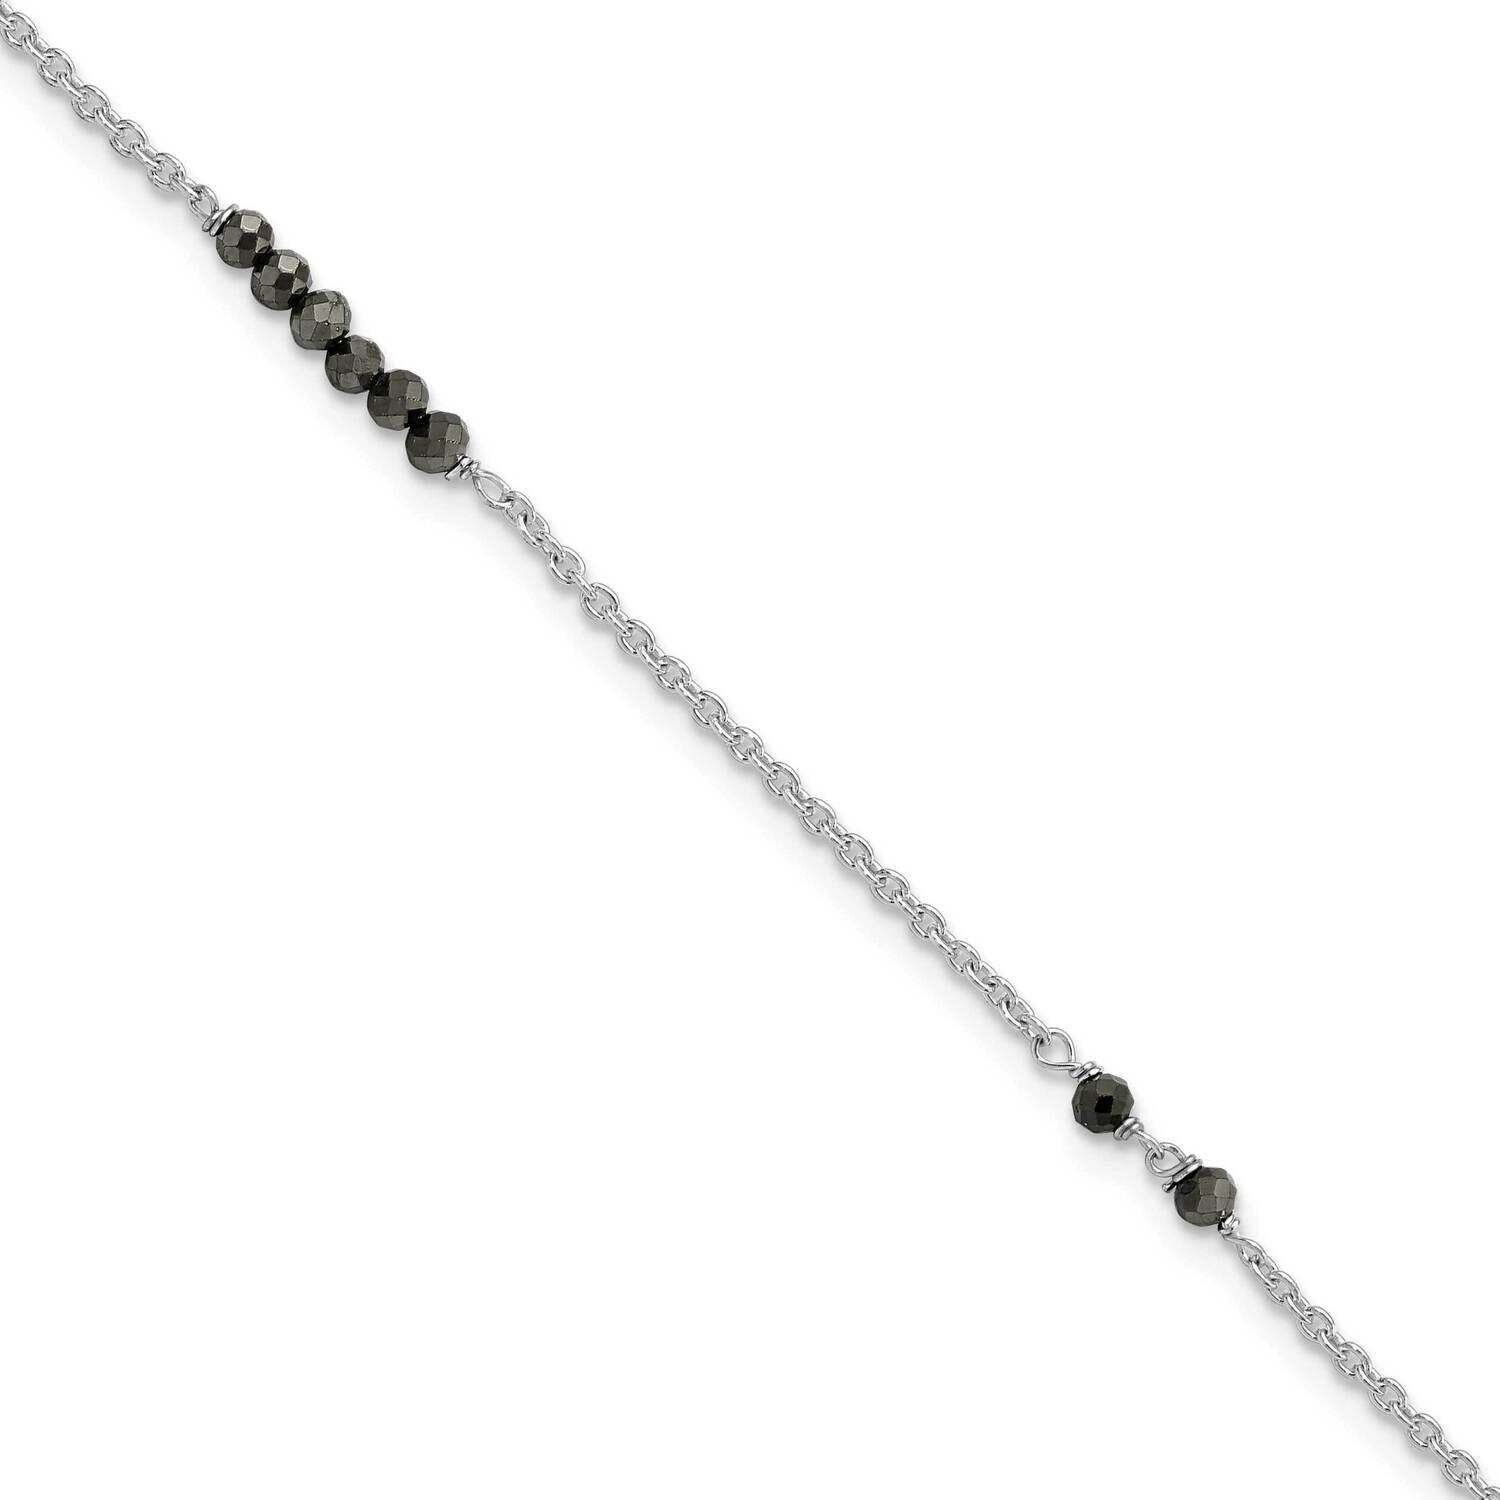 Black CZ Diamond Beads 9 Inch Plus 1 Inch Extender Anklet Sterling Silver QG5765-9